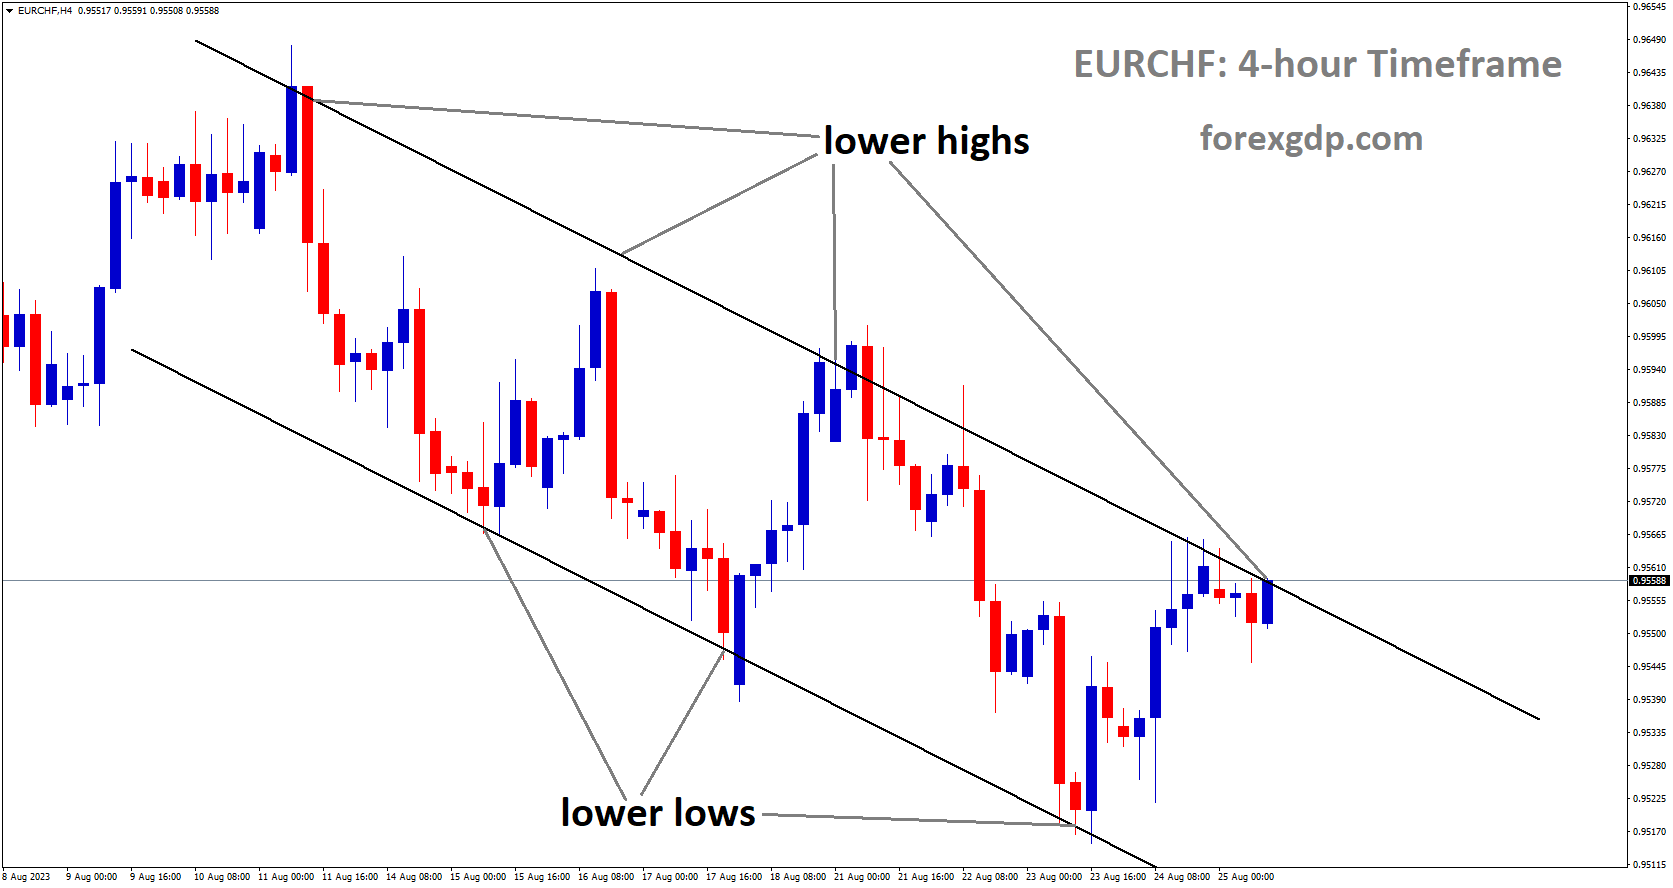 EURCHF is moving in Descending channel and market has reached lower high area of the channel